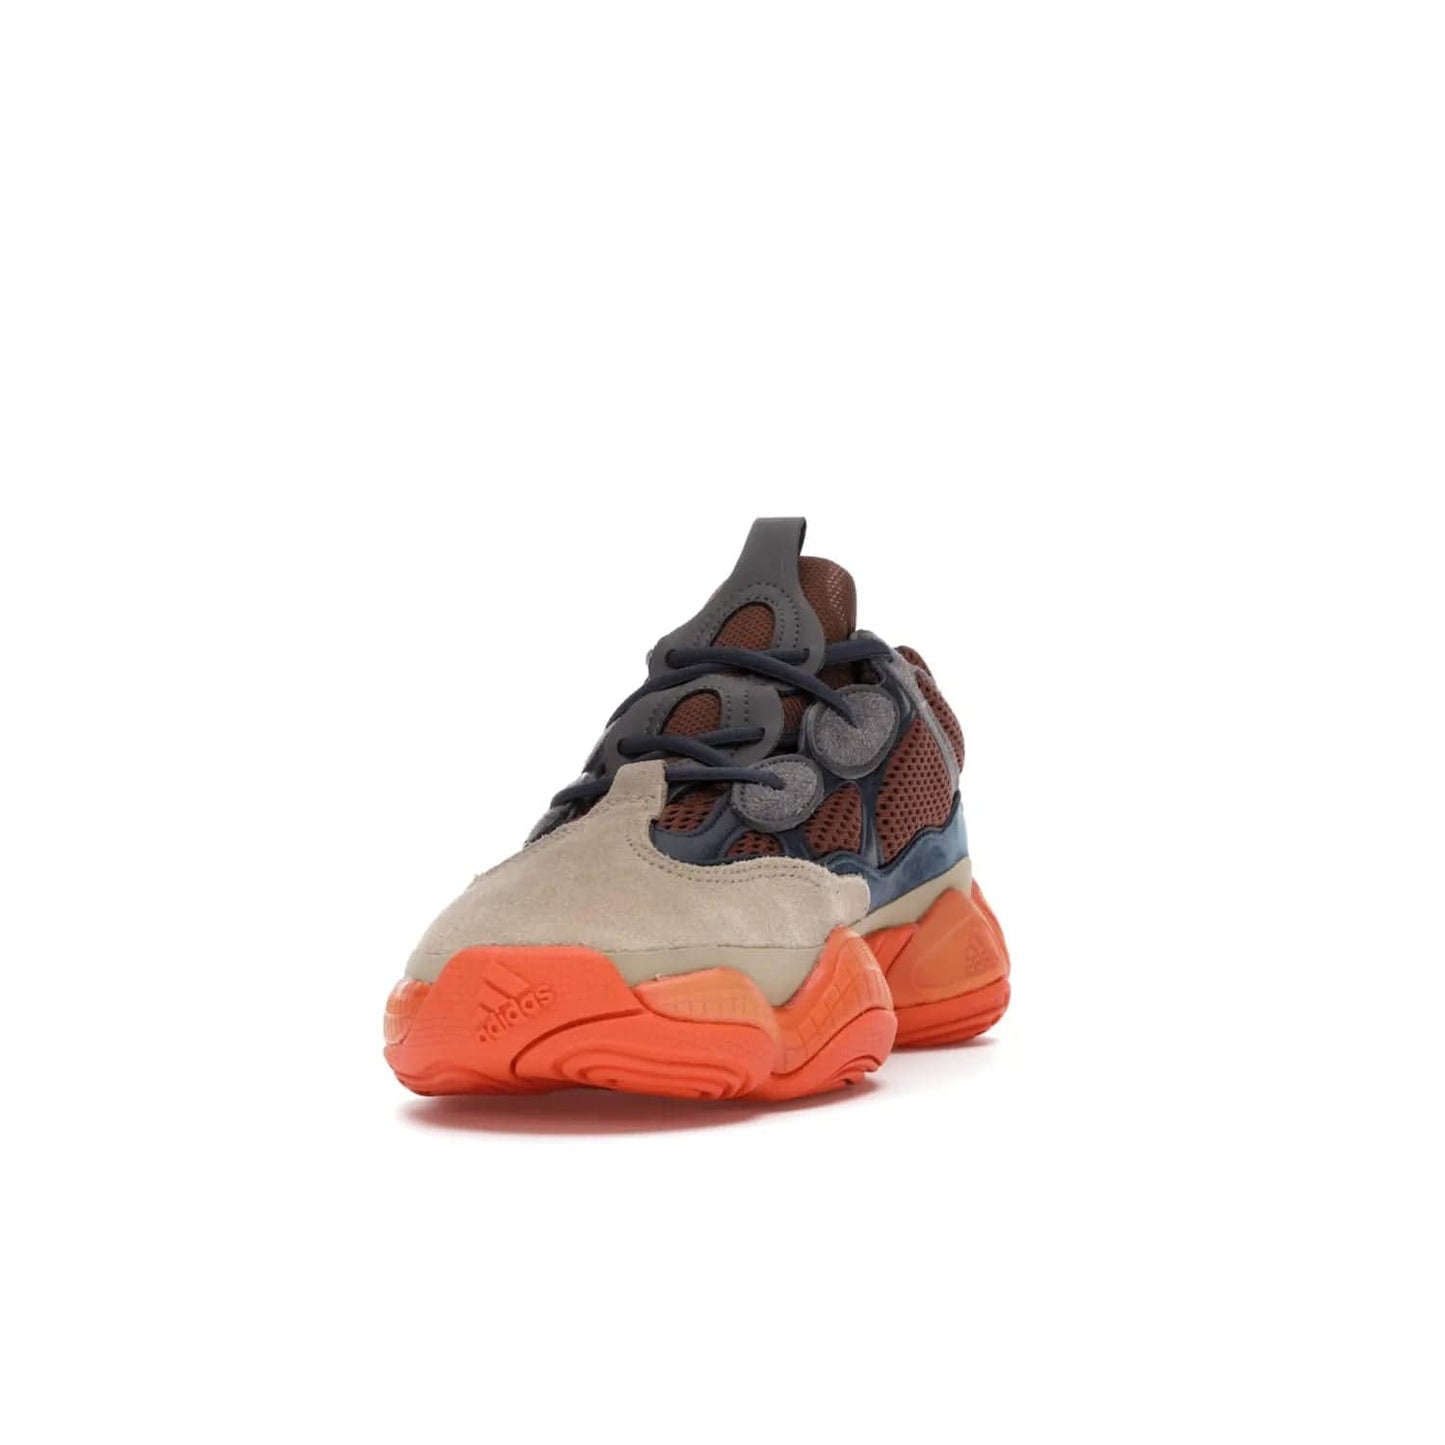 adidas Yeezy 500 Enflame - Image 12 - Only at www.BallersClubKickz.com - Step into style with the adidas Yeezy 500 Enflame. Mix of mesh, leather, and suede layered together to create tonal-brown, dark blue, & orange. Orange AdiPRENE sole provides superior cushioning & comfort. Get yours and experience maximum style.